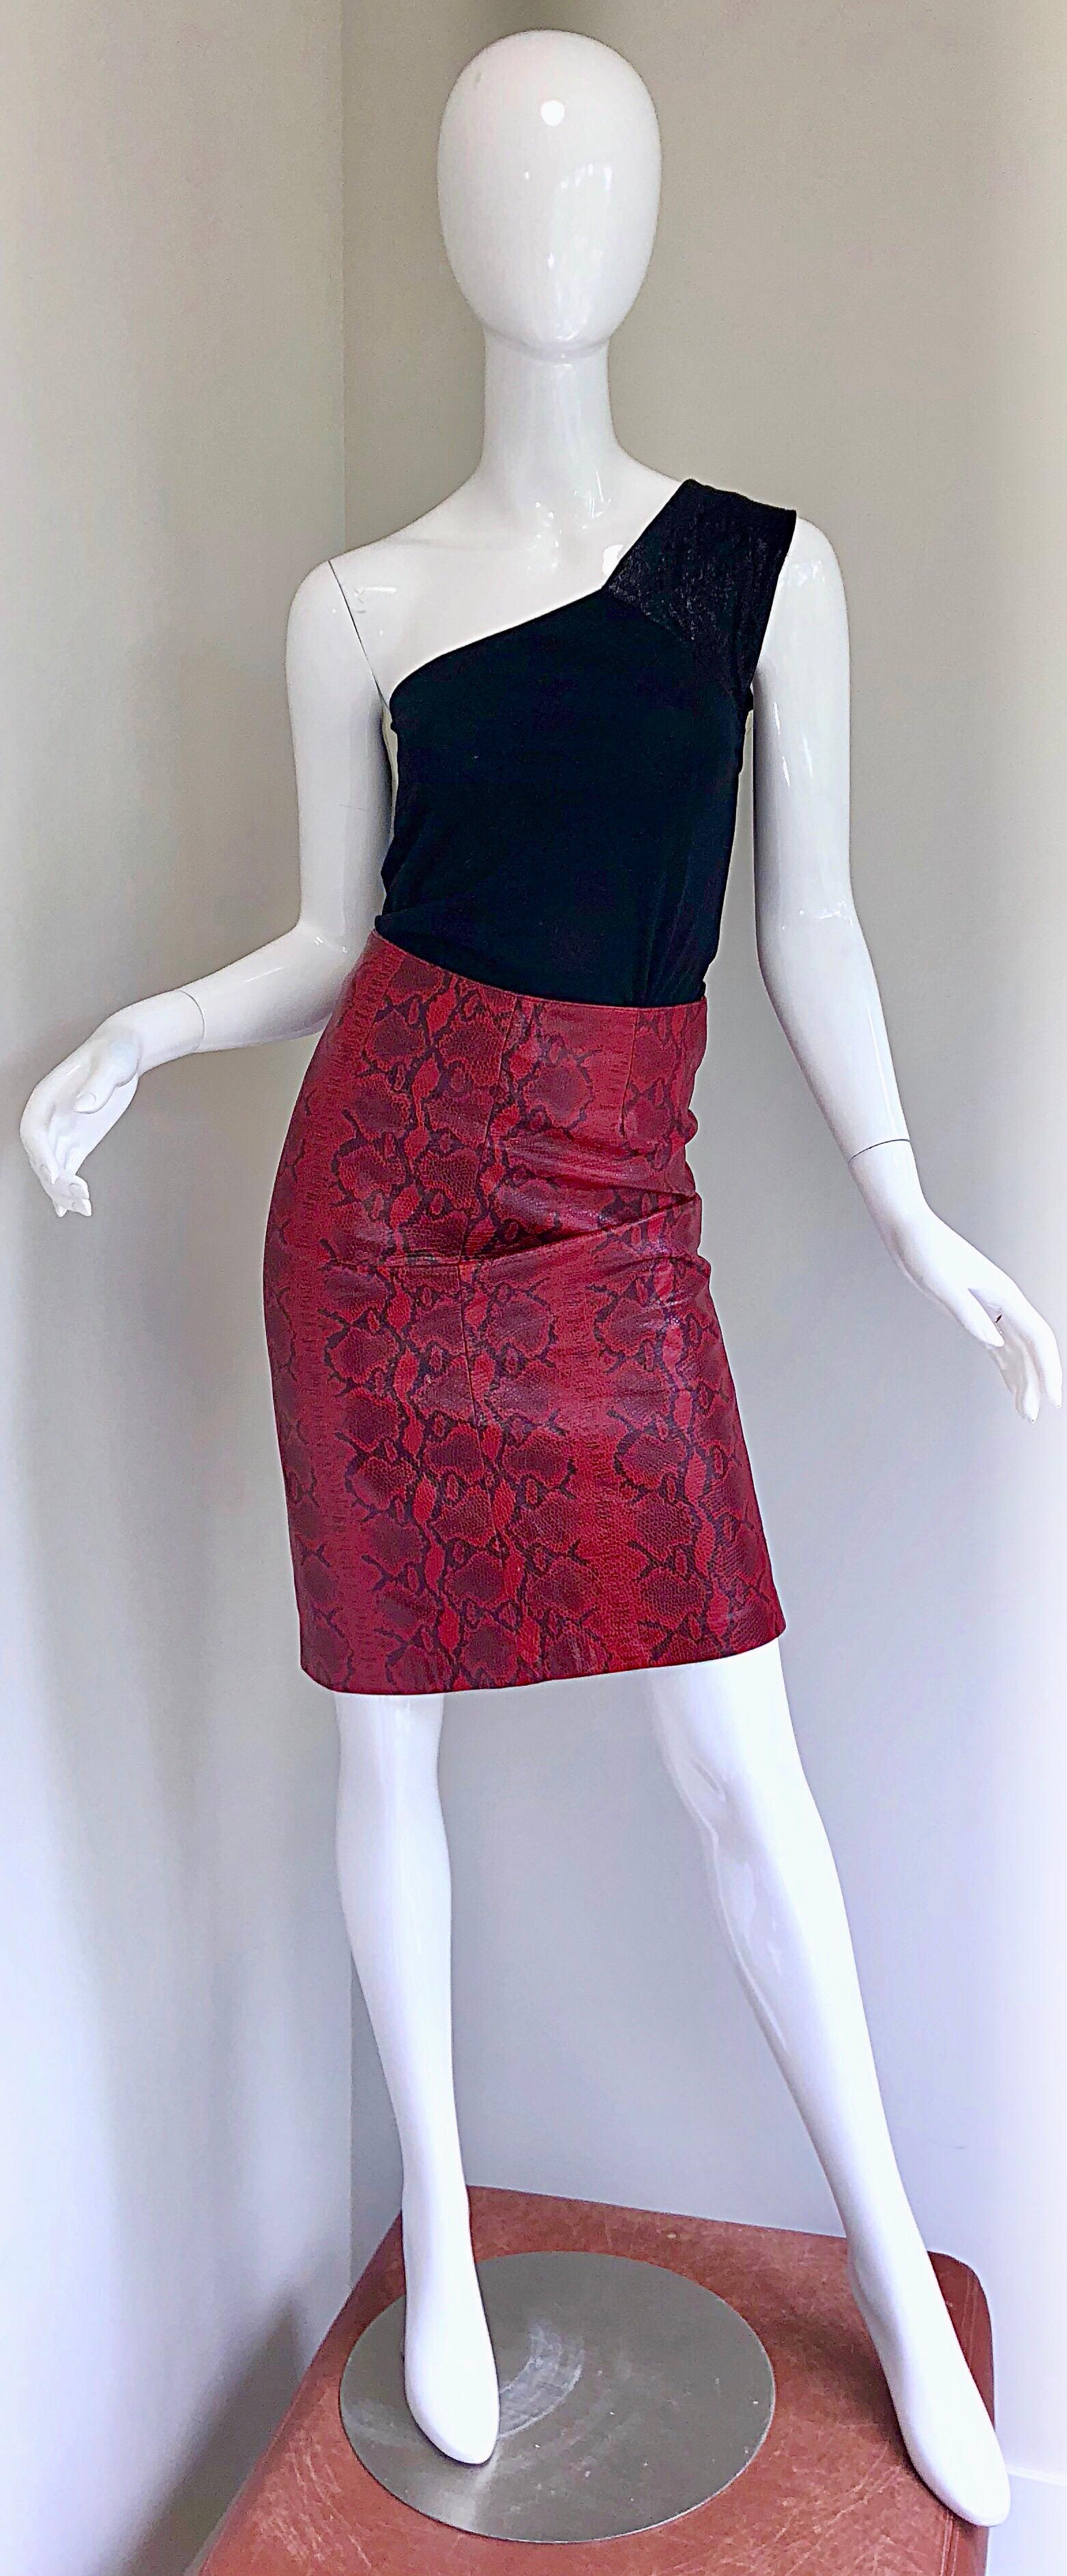 Sexy 1980s red leather snakeskin print high waisted pencil skirt! Features a classic red and black animal print throughout. Hidden zipper up the back with button closure. Fully lined. Can easily be dressed up or down. The pictured black GUCCI by TOM